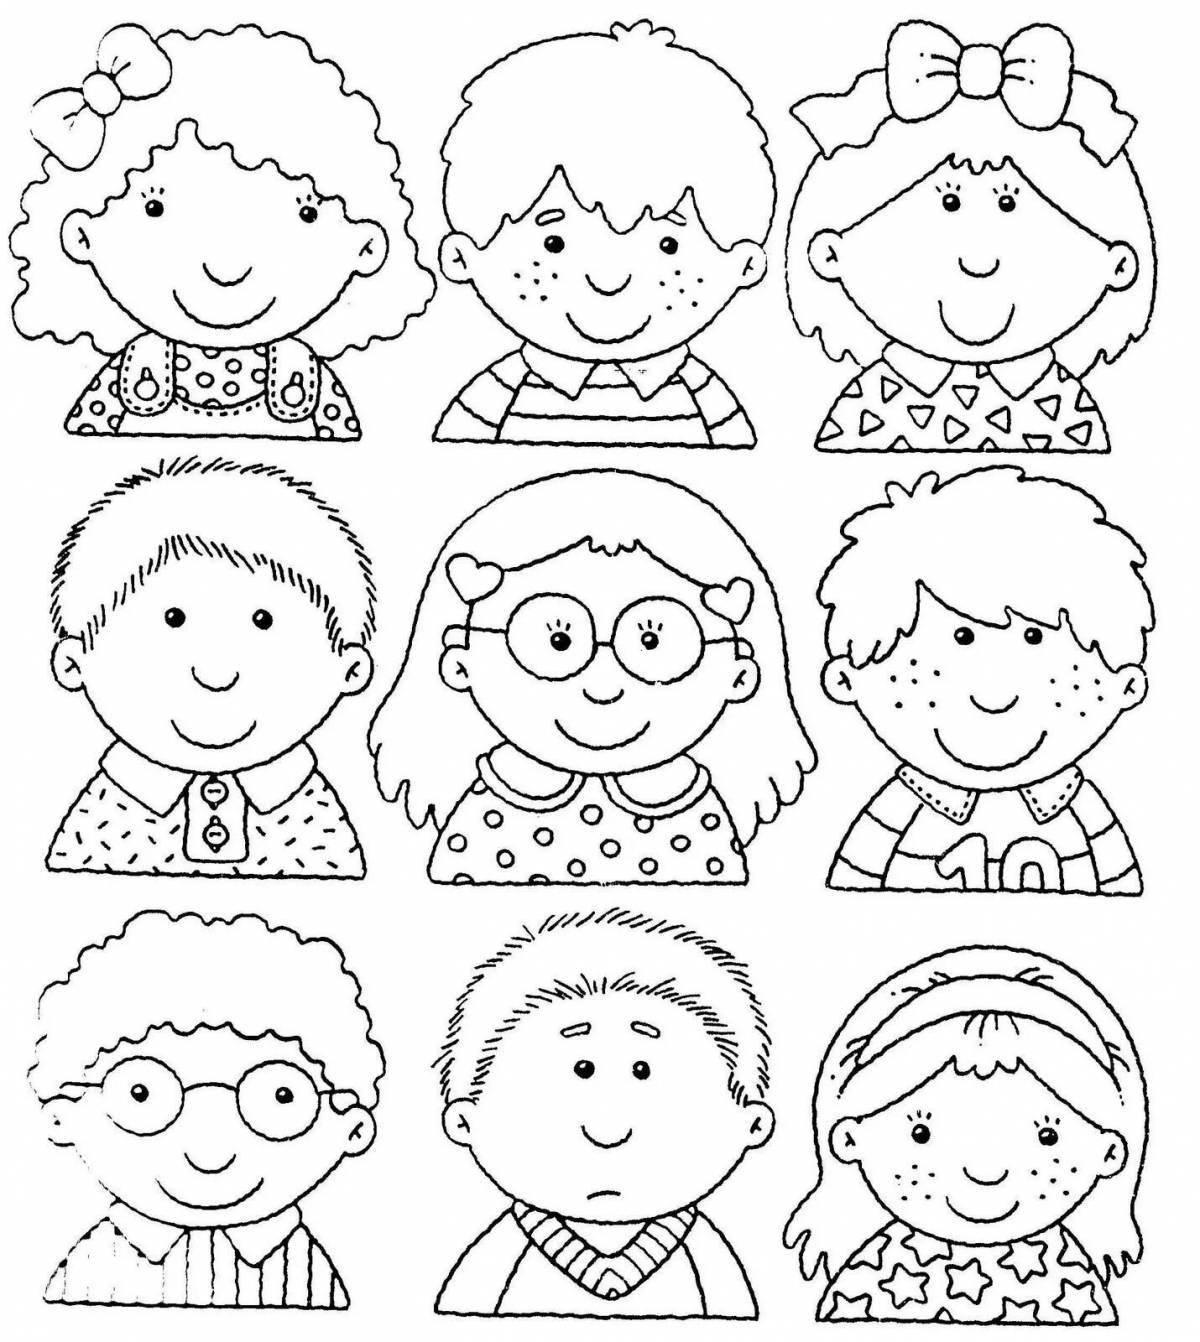 Serene emotion coloring pages for preschoolers